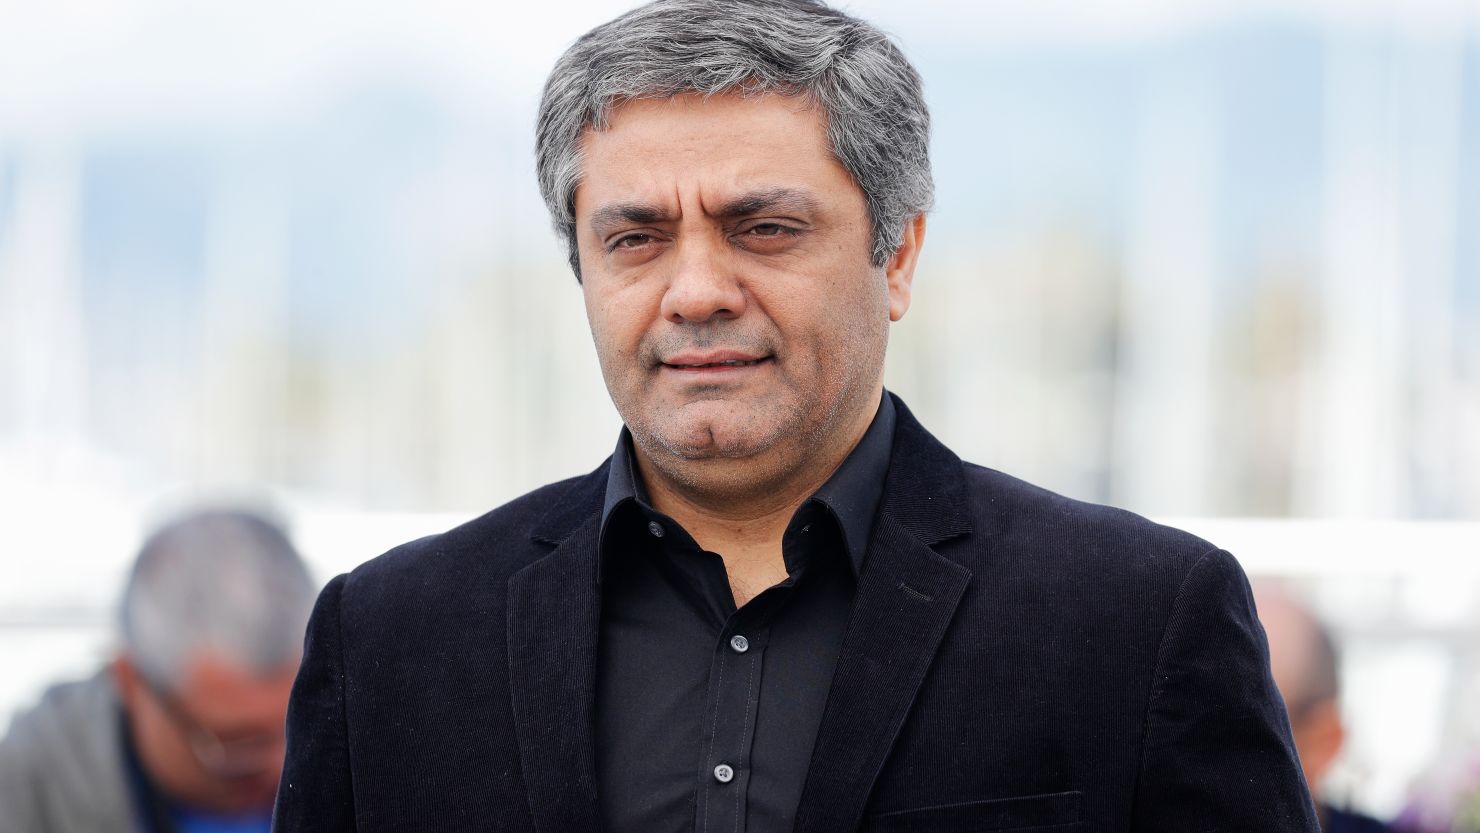 Director Mohammad Rasoulof attends the 70th annual Cannes Film Festival in 2017.